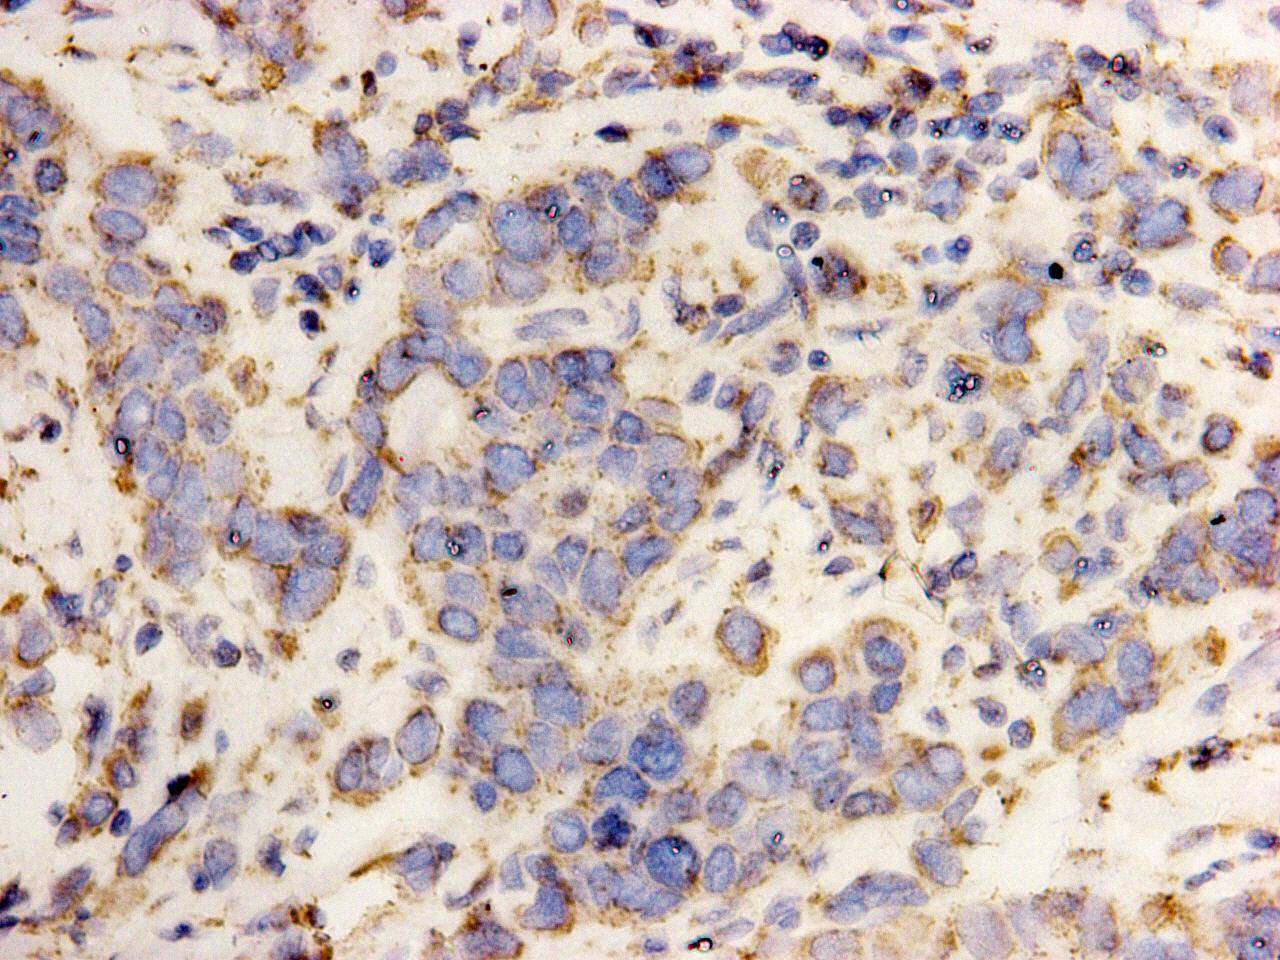 Immunocytochemistry analysis of HepG2 cells labeling HSP60 with Mouse anti-HSP60 antibody (M1007-9) at 1/100 dilution.<br />
<br />
Cells were fixed in 4% paraformaldehyde for 10 minutes at 37 ℃, permeabilized with 0.05% Triton X-100 in PBS for 20 minutes, and then blocked with 2% negative goat serum for 30 minutes at room temperature. Cells were then incubated with Rabbit anti-HSP60 antibody (M1007-9) at 1/100 dilution in 2% negative goat serum overnight at 4 ℃. Goat Anti-Mouse IgG H&L (iFluor™ 488, HA1125) was used as the secondary antibody at 1/1,000 dilution. PBS instead of the primary antibody was used as the secondary antibody only control. Nuclear DNA was labelled in blue with DAPI.